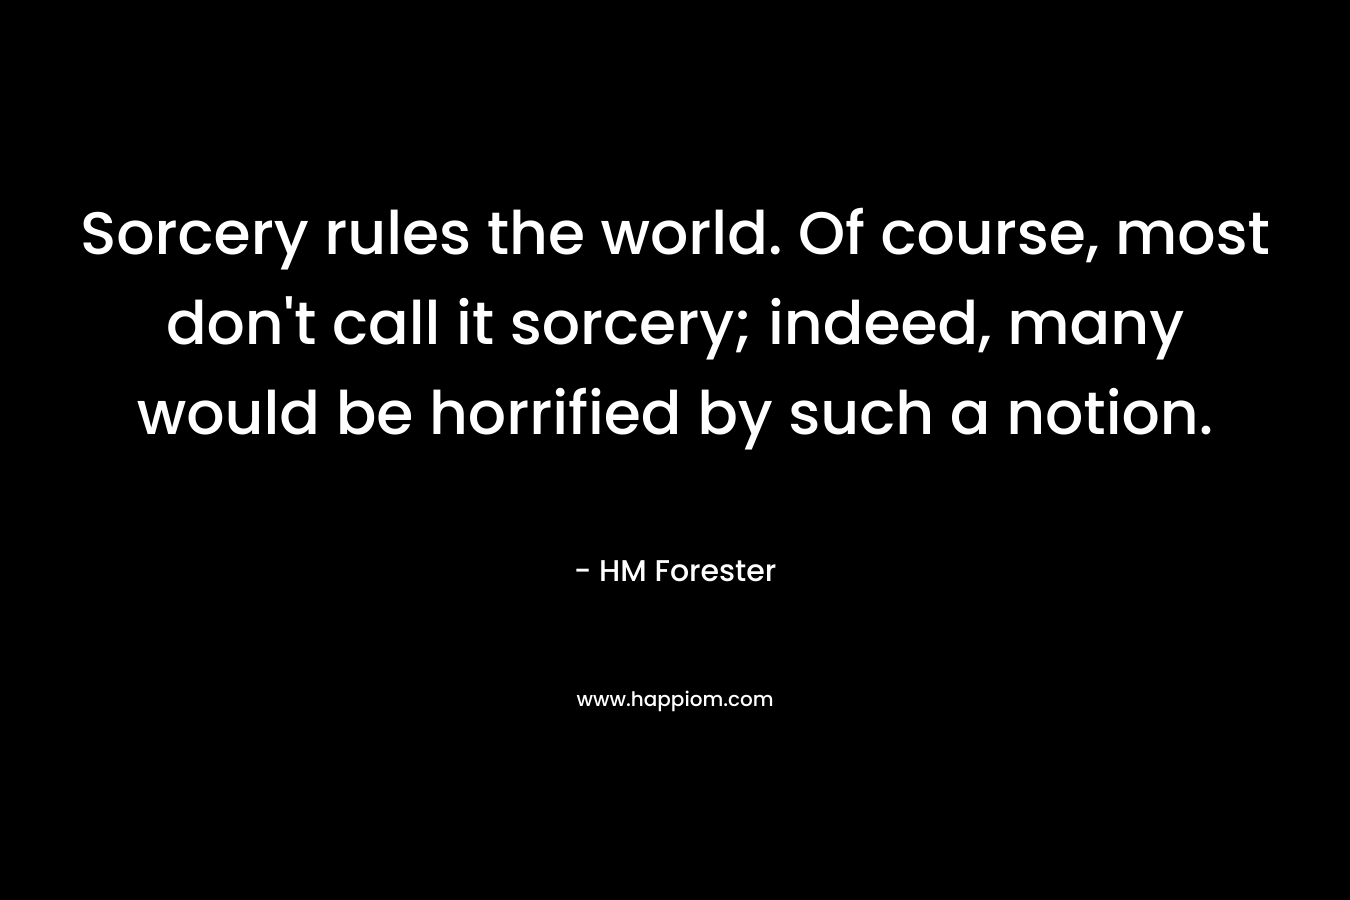 Sorcery rules the world. Of course, most don't call it sorcery; indeed, many would be horrified by such a notion.